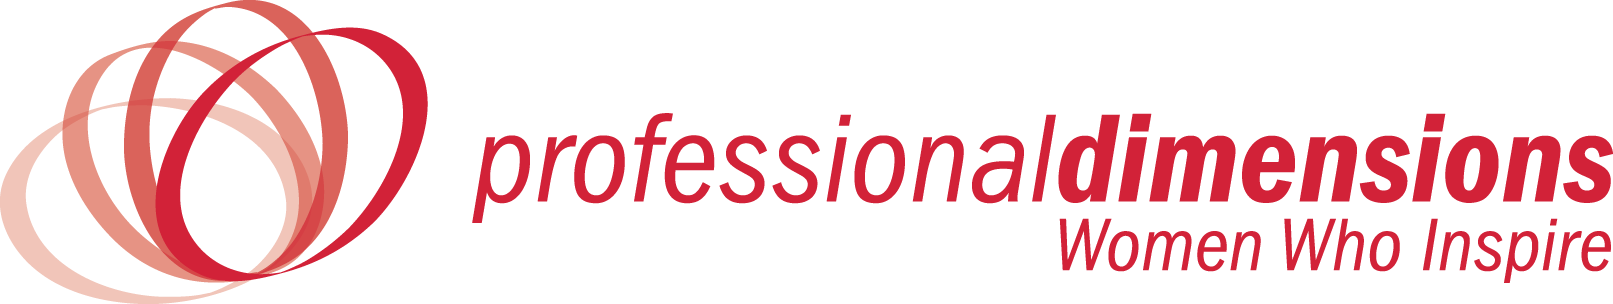 Professional Dimensions logo with tagline Women Who Inspire